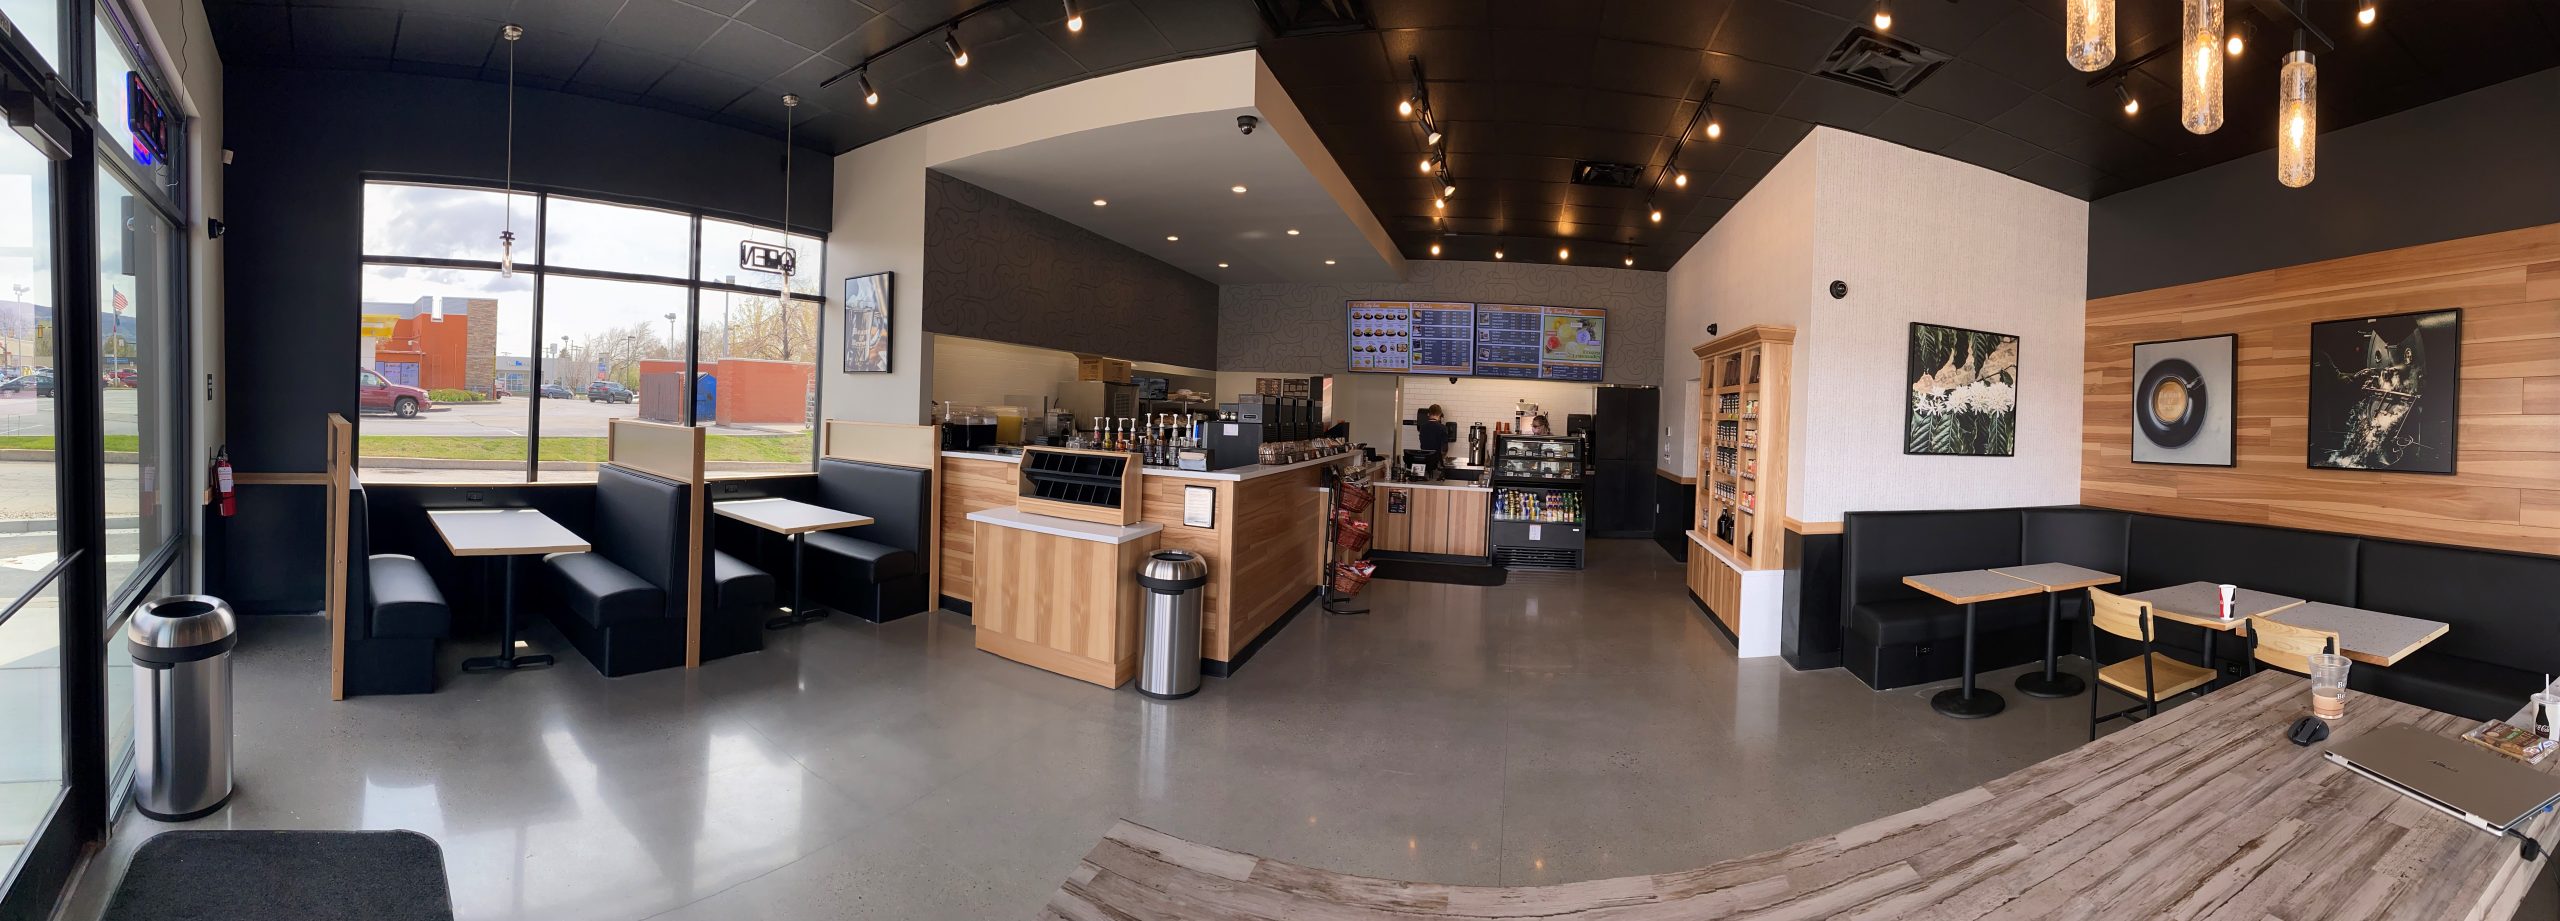 Interior photo of Bountiful on 500 West Beans and Brews